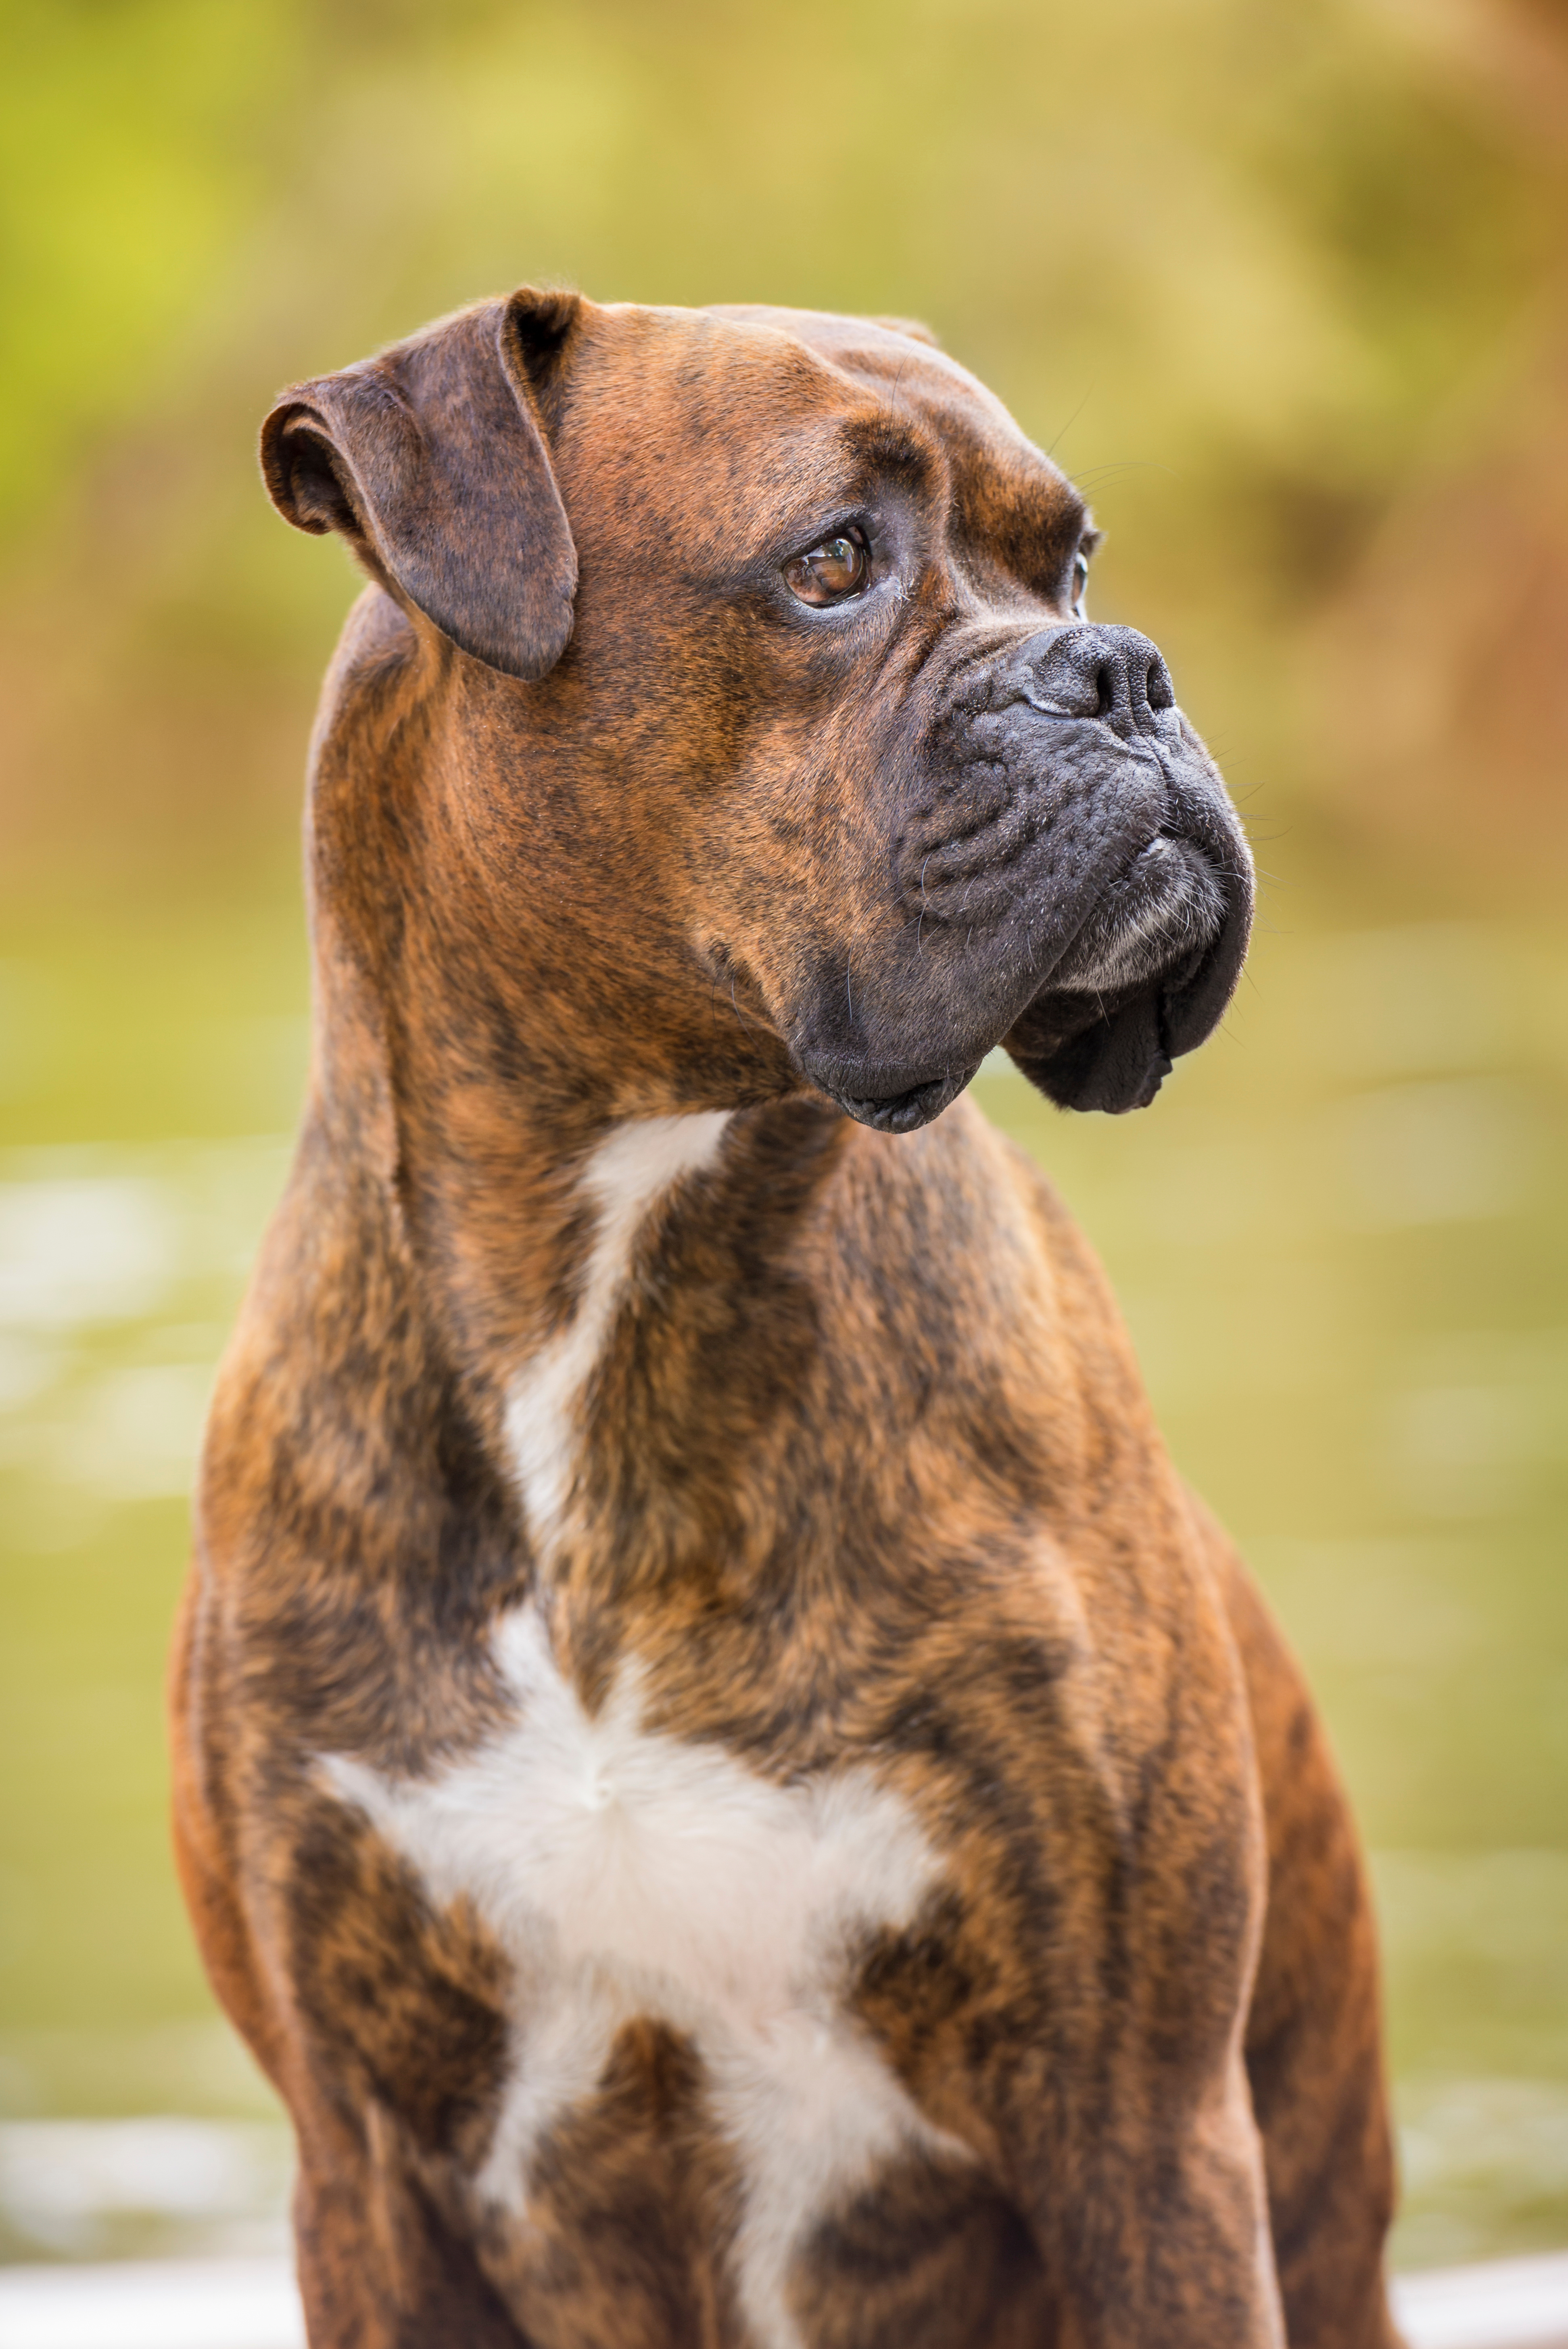 A trained boxer dog - Dog Training Elite Southeast Louisiana is the best choice for boxer dog training in Mandeville, LA!